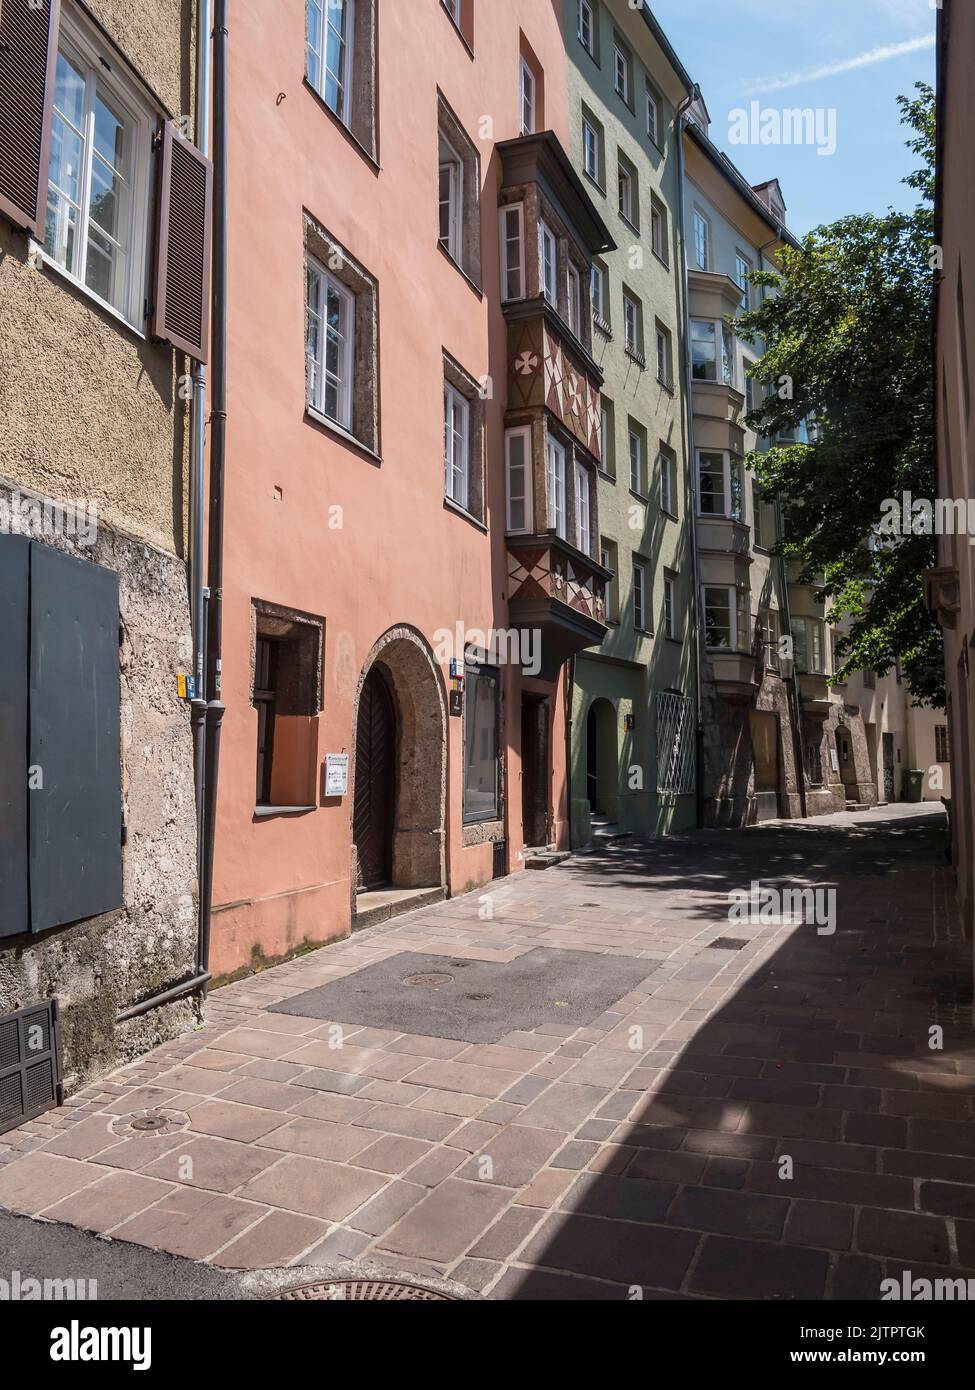 This street scene image is one of the many narrow alleyways in the old medieval city of Innsbruck, provincial capital city of Tirol in Austria. Stock Photo